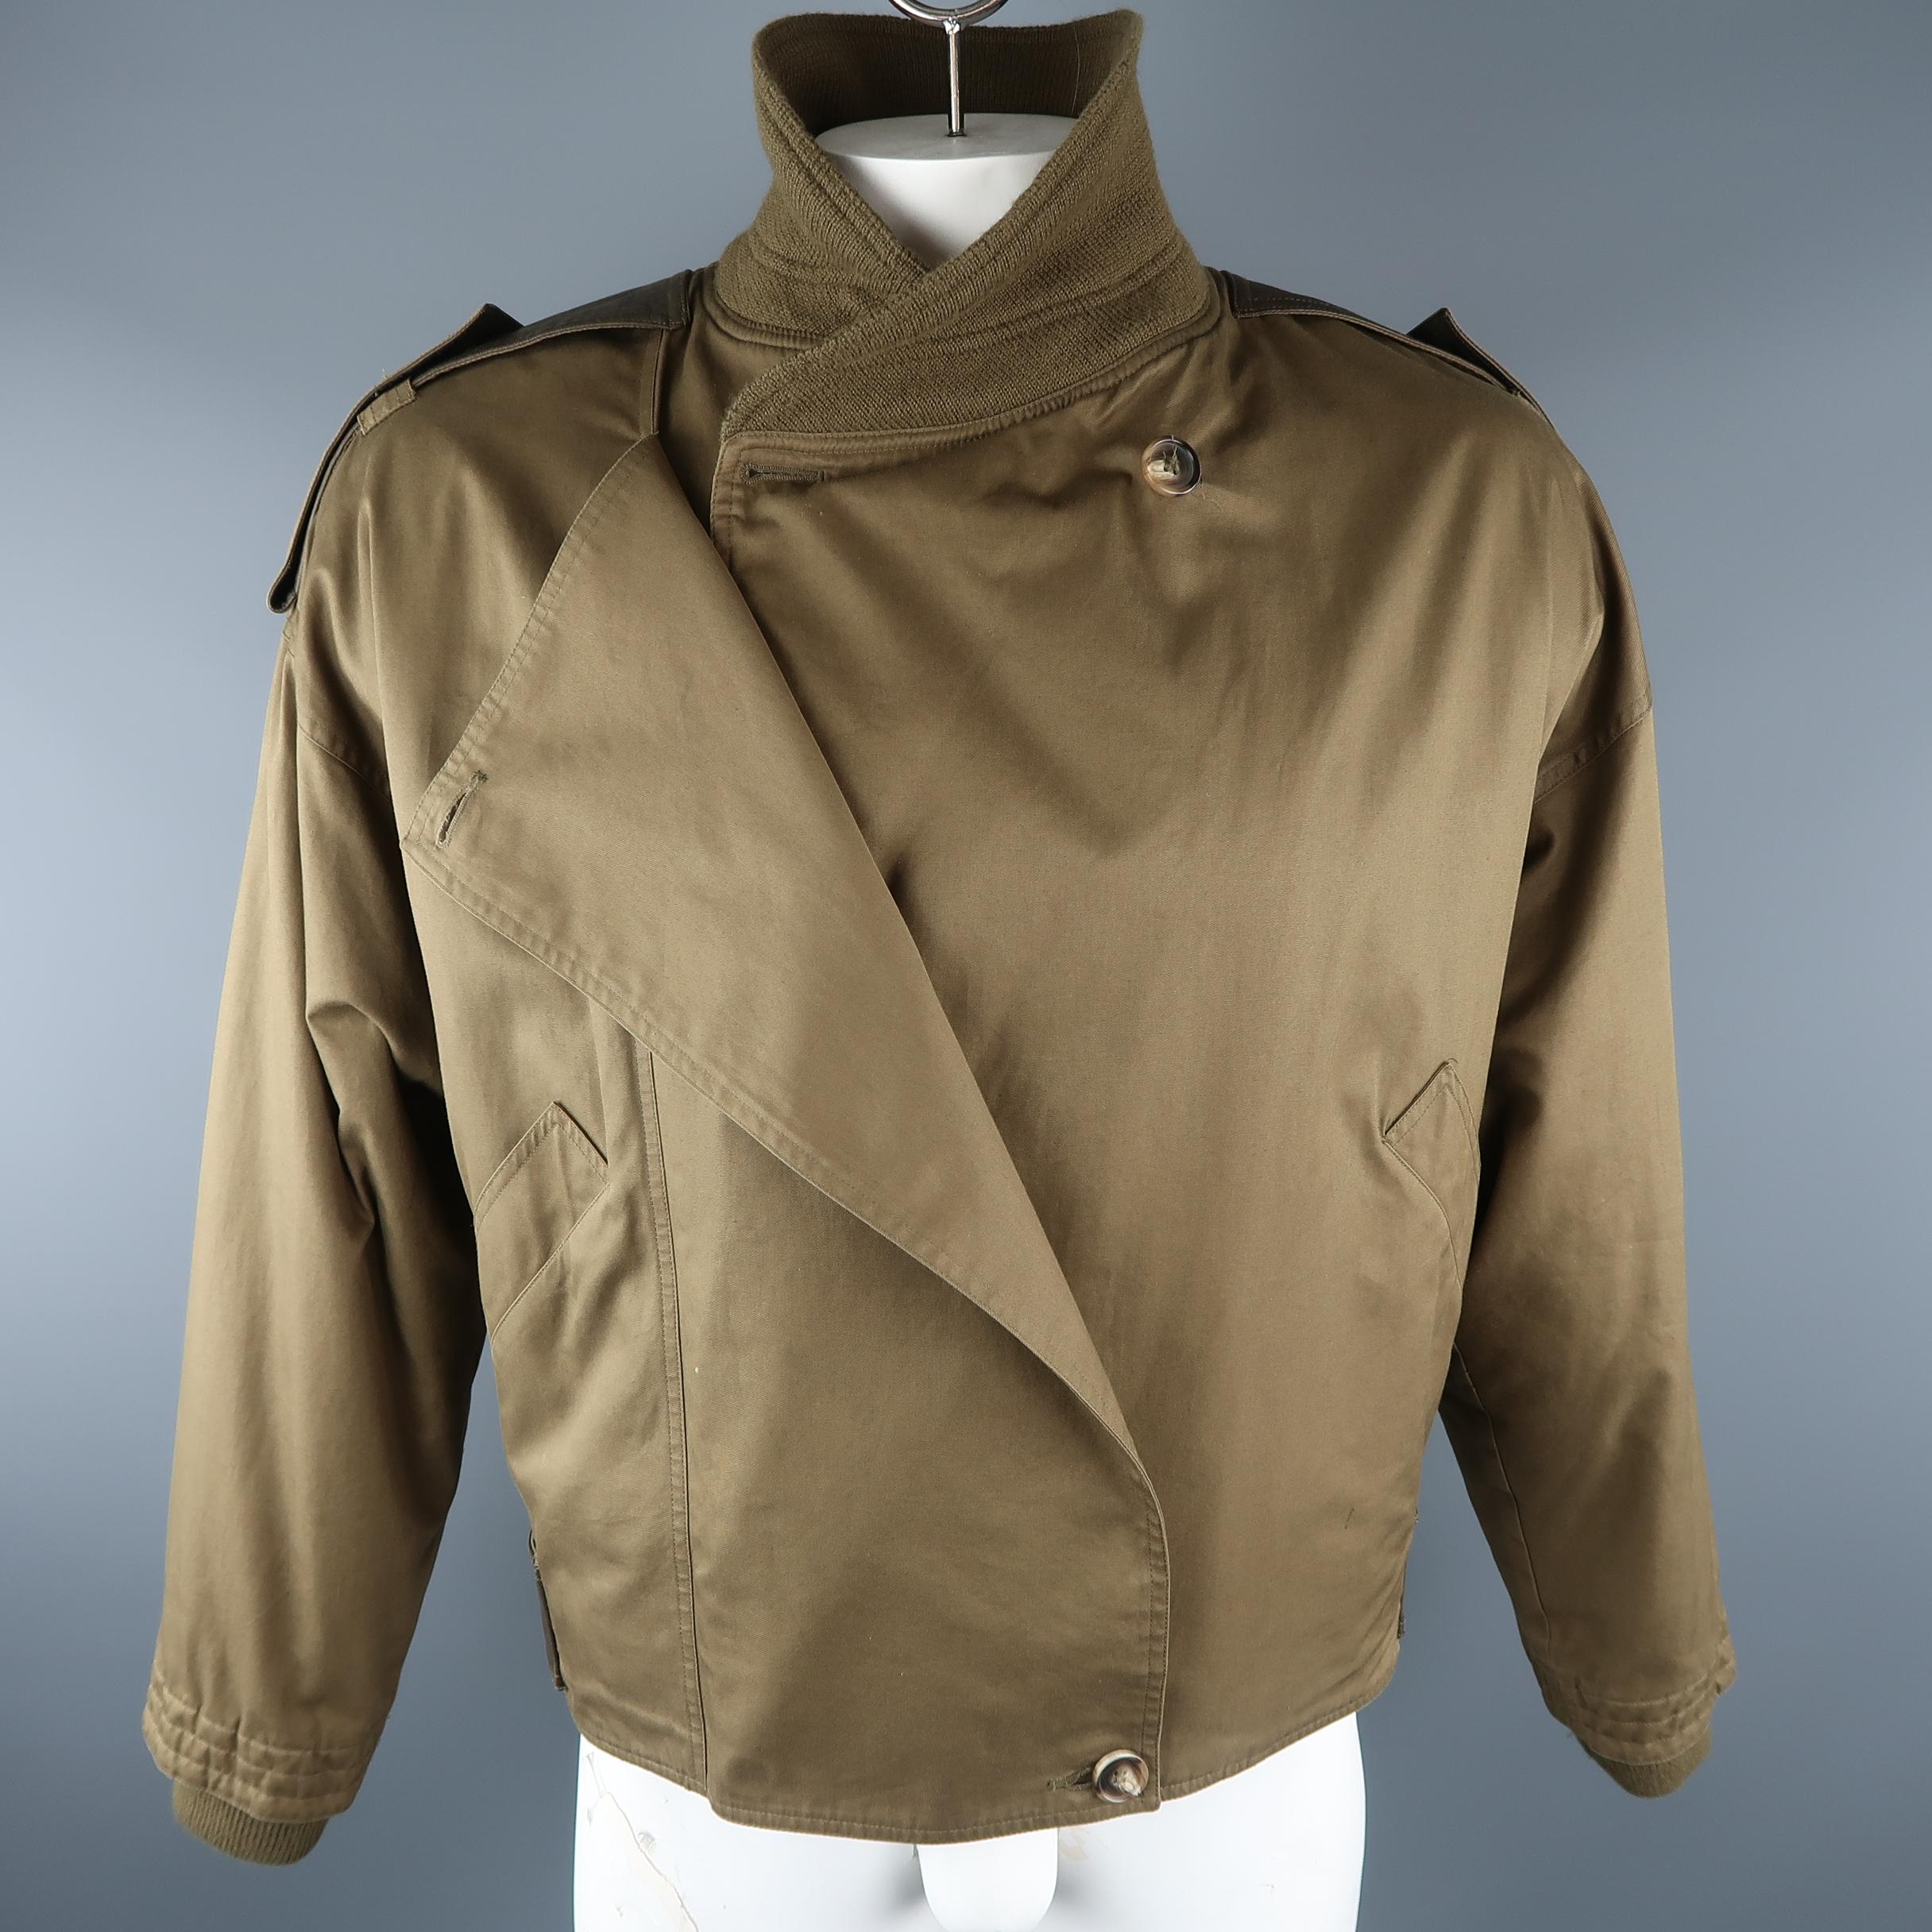 Vintage GIANNI VERSACE cropped jacket come in olive solid cotton with leather trim, buttoned closure and ribbed collar and cuffs. Made in Italy.
 
Excellent Pre-Owned Condition.
Marked: 52 IT
 
Measurements:
 
Shoulder: 17.5  in.
Chest: 54 